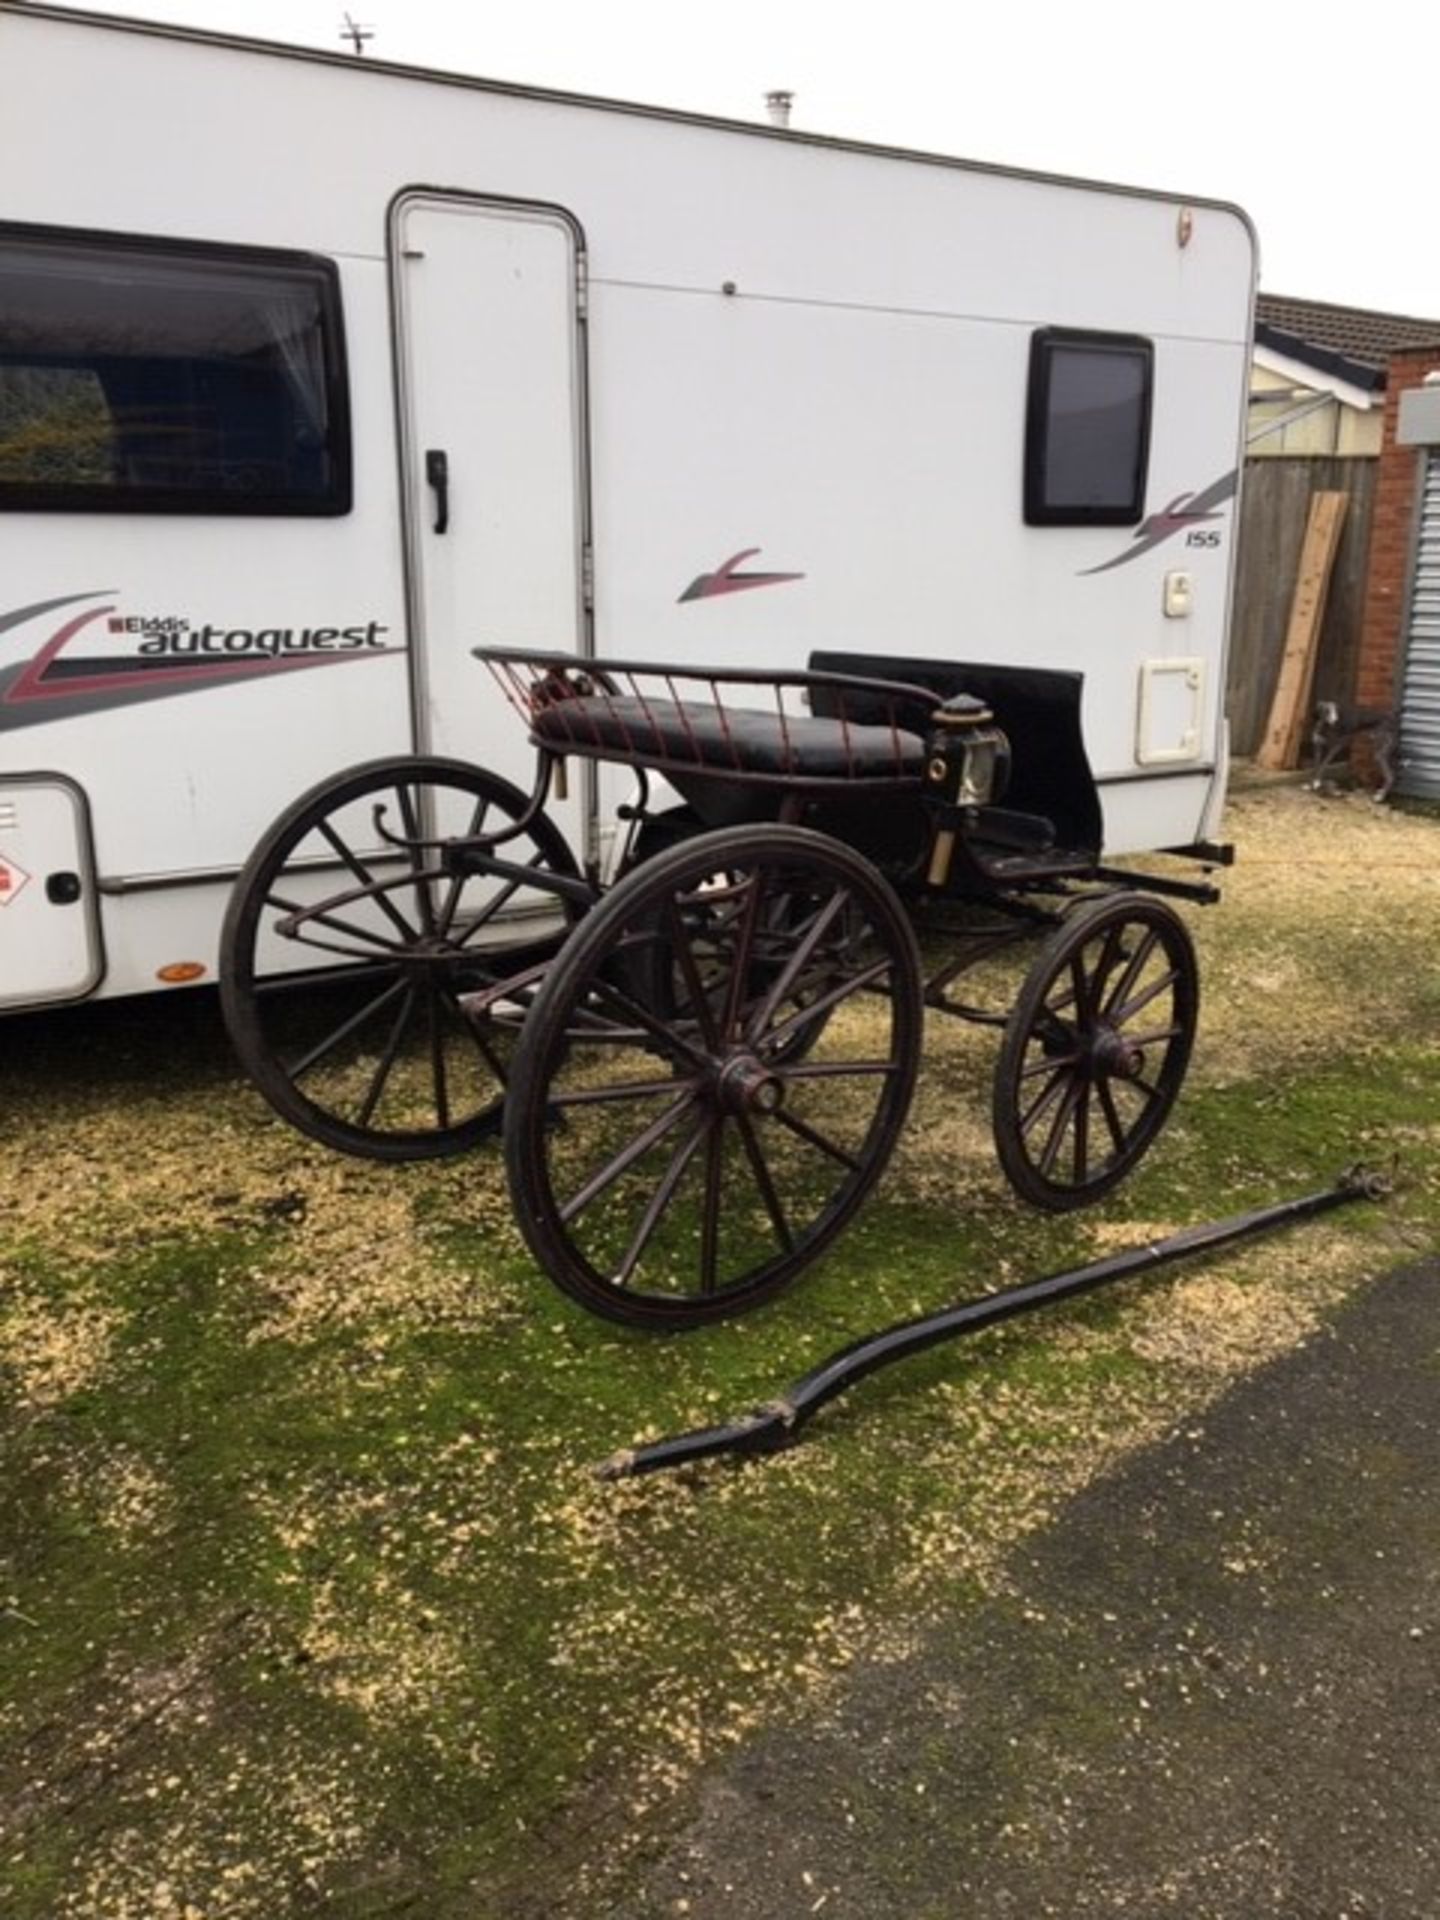 SPIDER PHAETON to suit 12 to 13hh pony. Painted black, on 12-spoke wheels with brass hub caps and e - Image 3 of 3